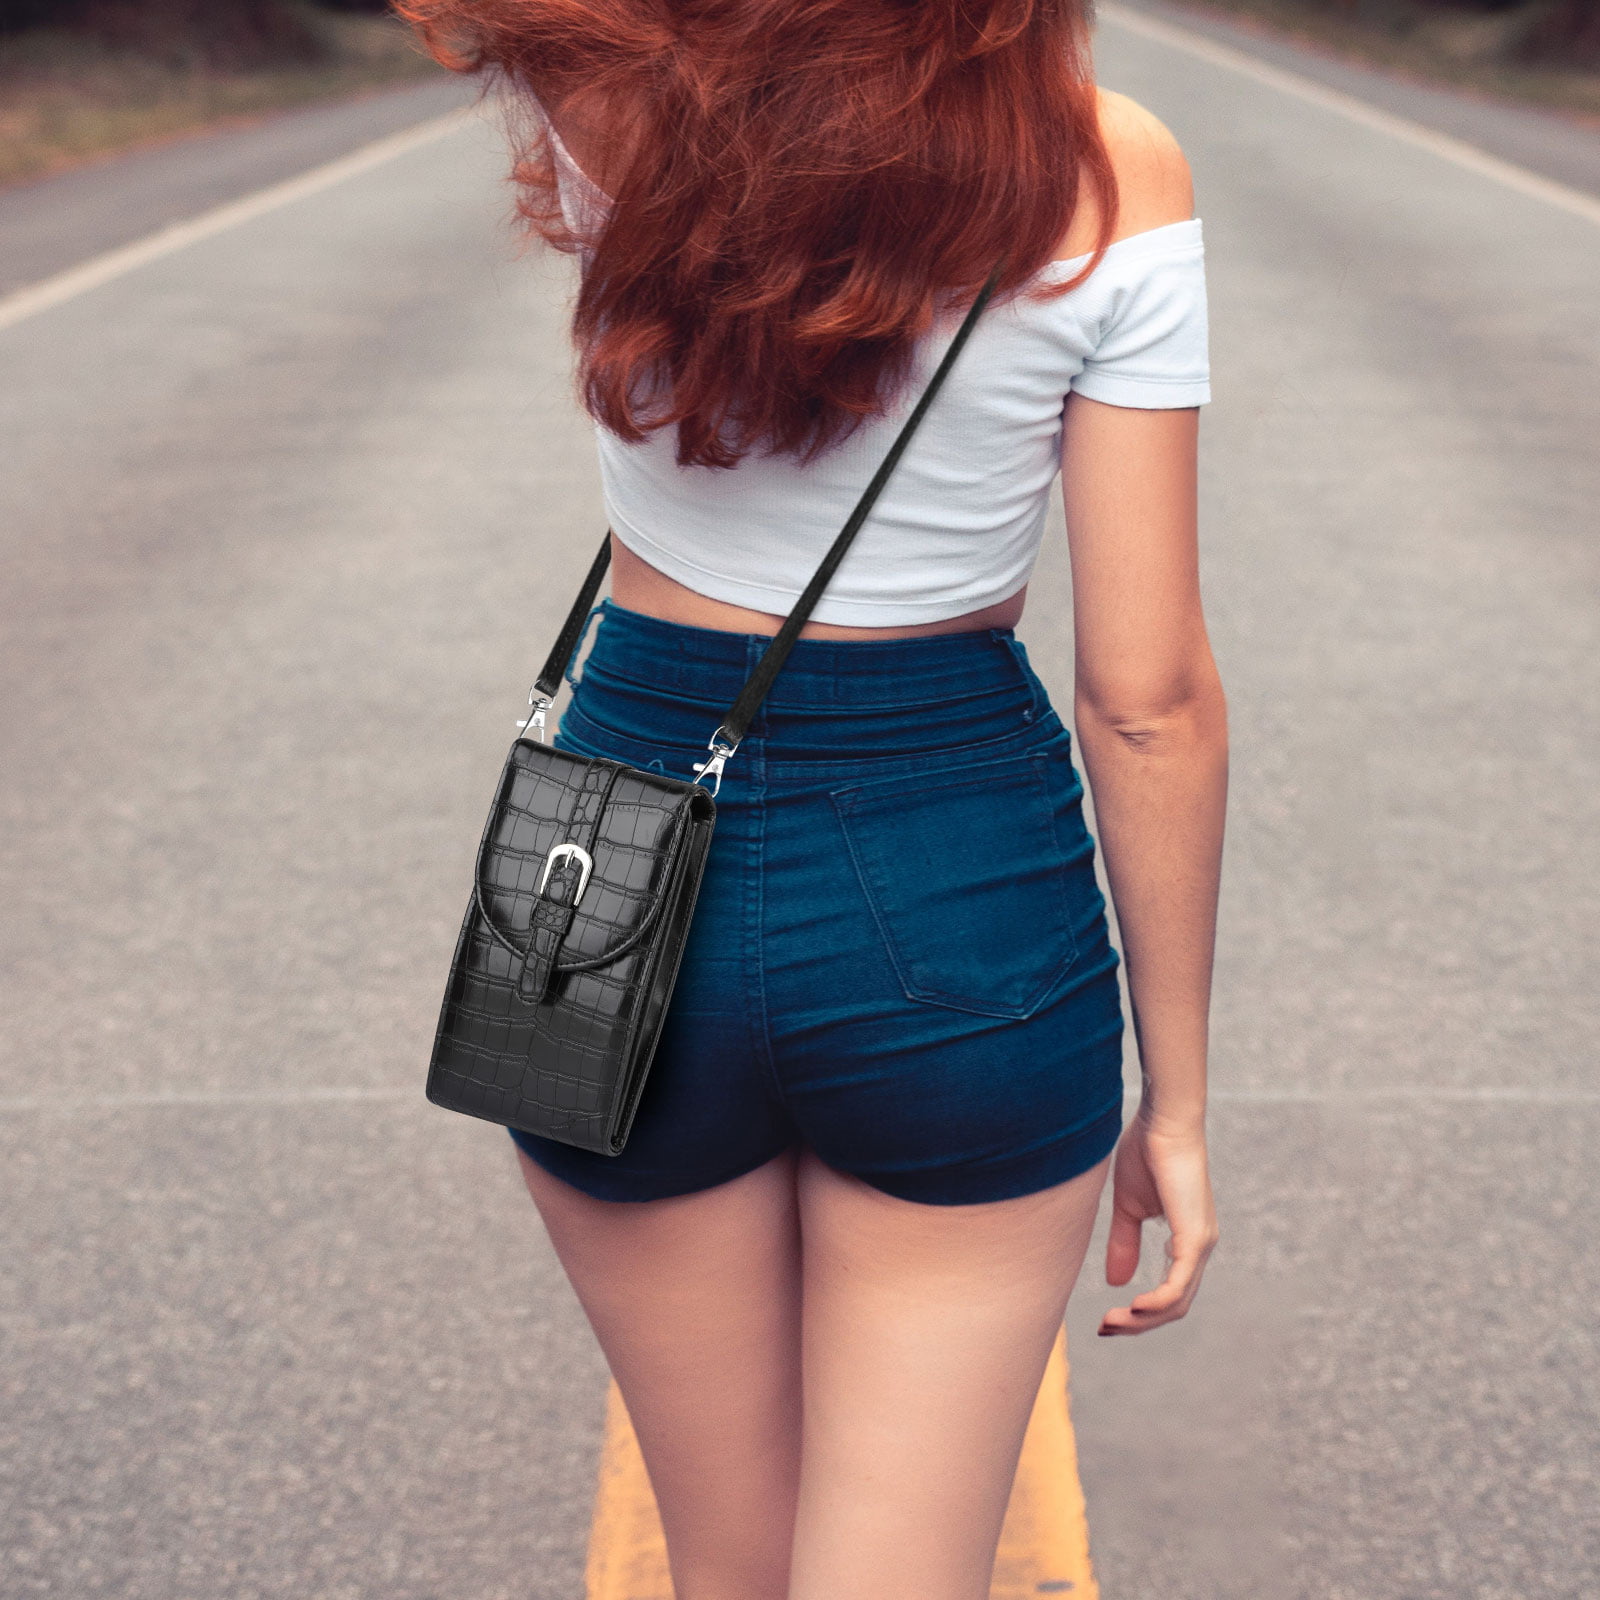 Sm Conv Phone Crossbody Leather · Available at Los Angeles International  Airport (LAX)